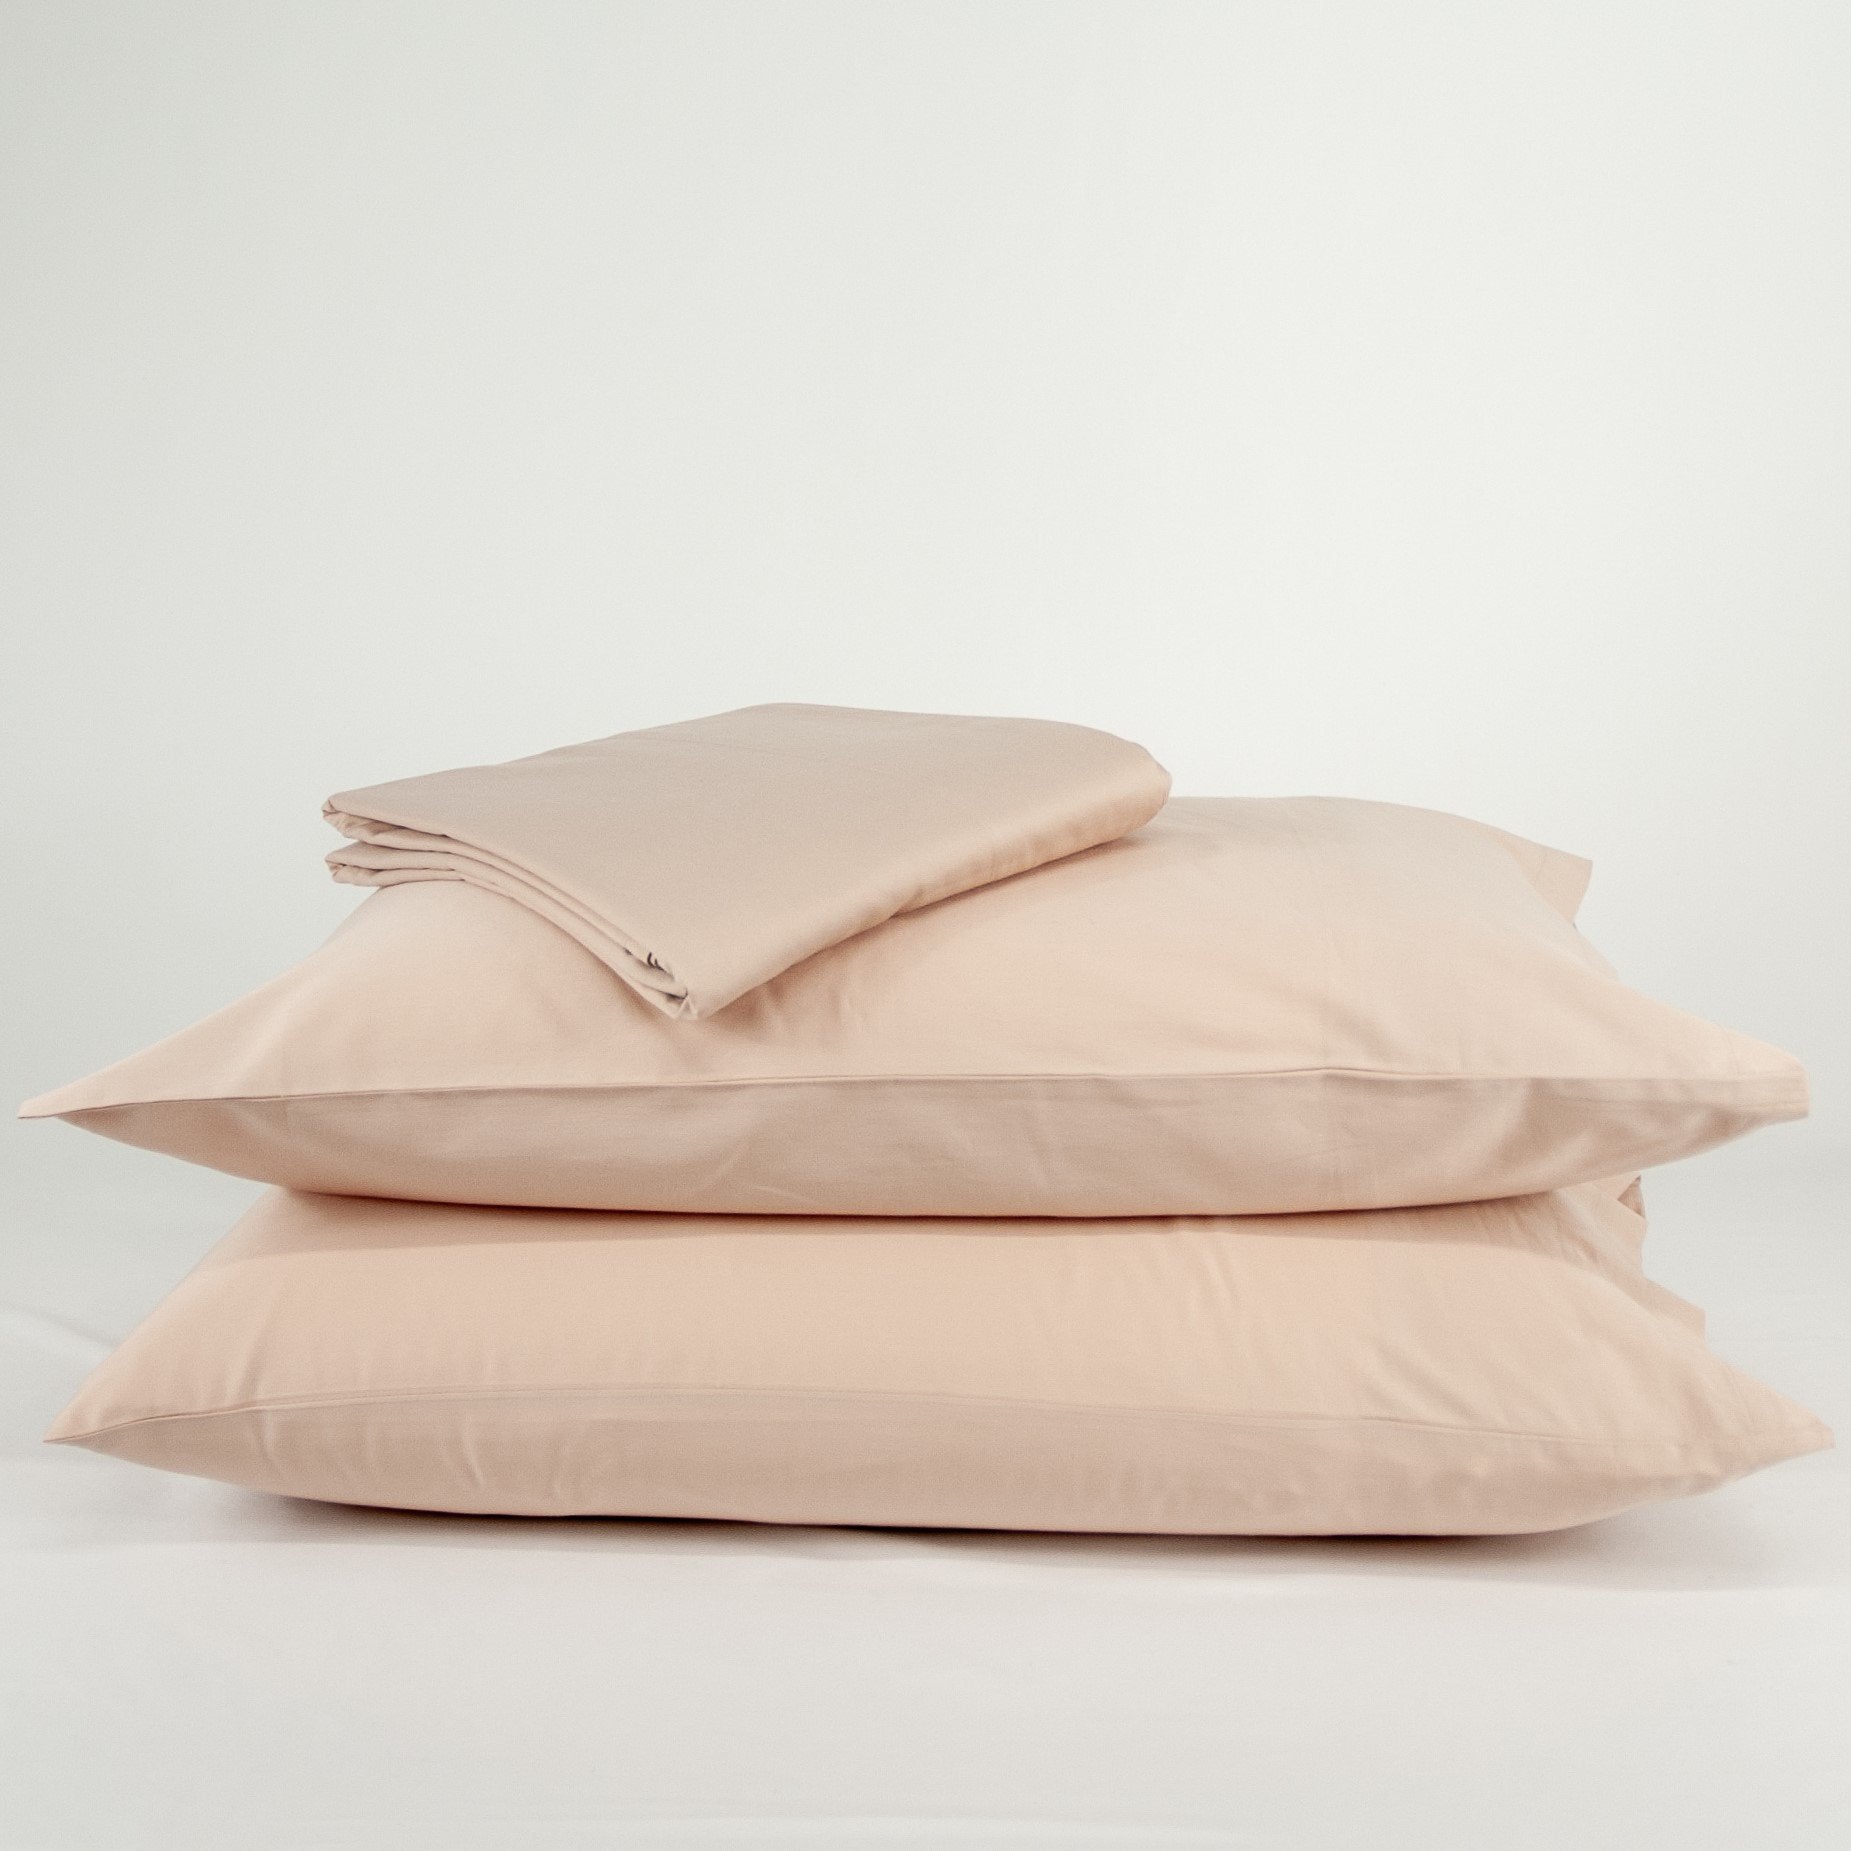 Stacked organic cotton pillowcases and sheets in blush pink